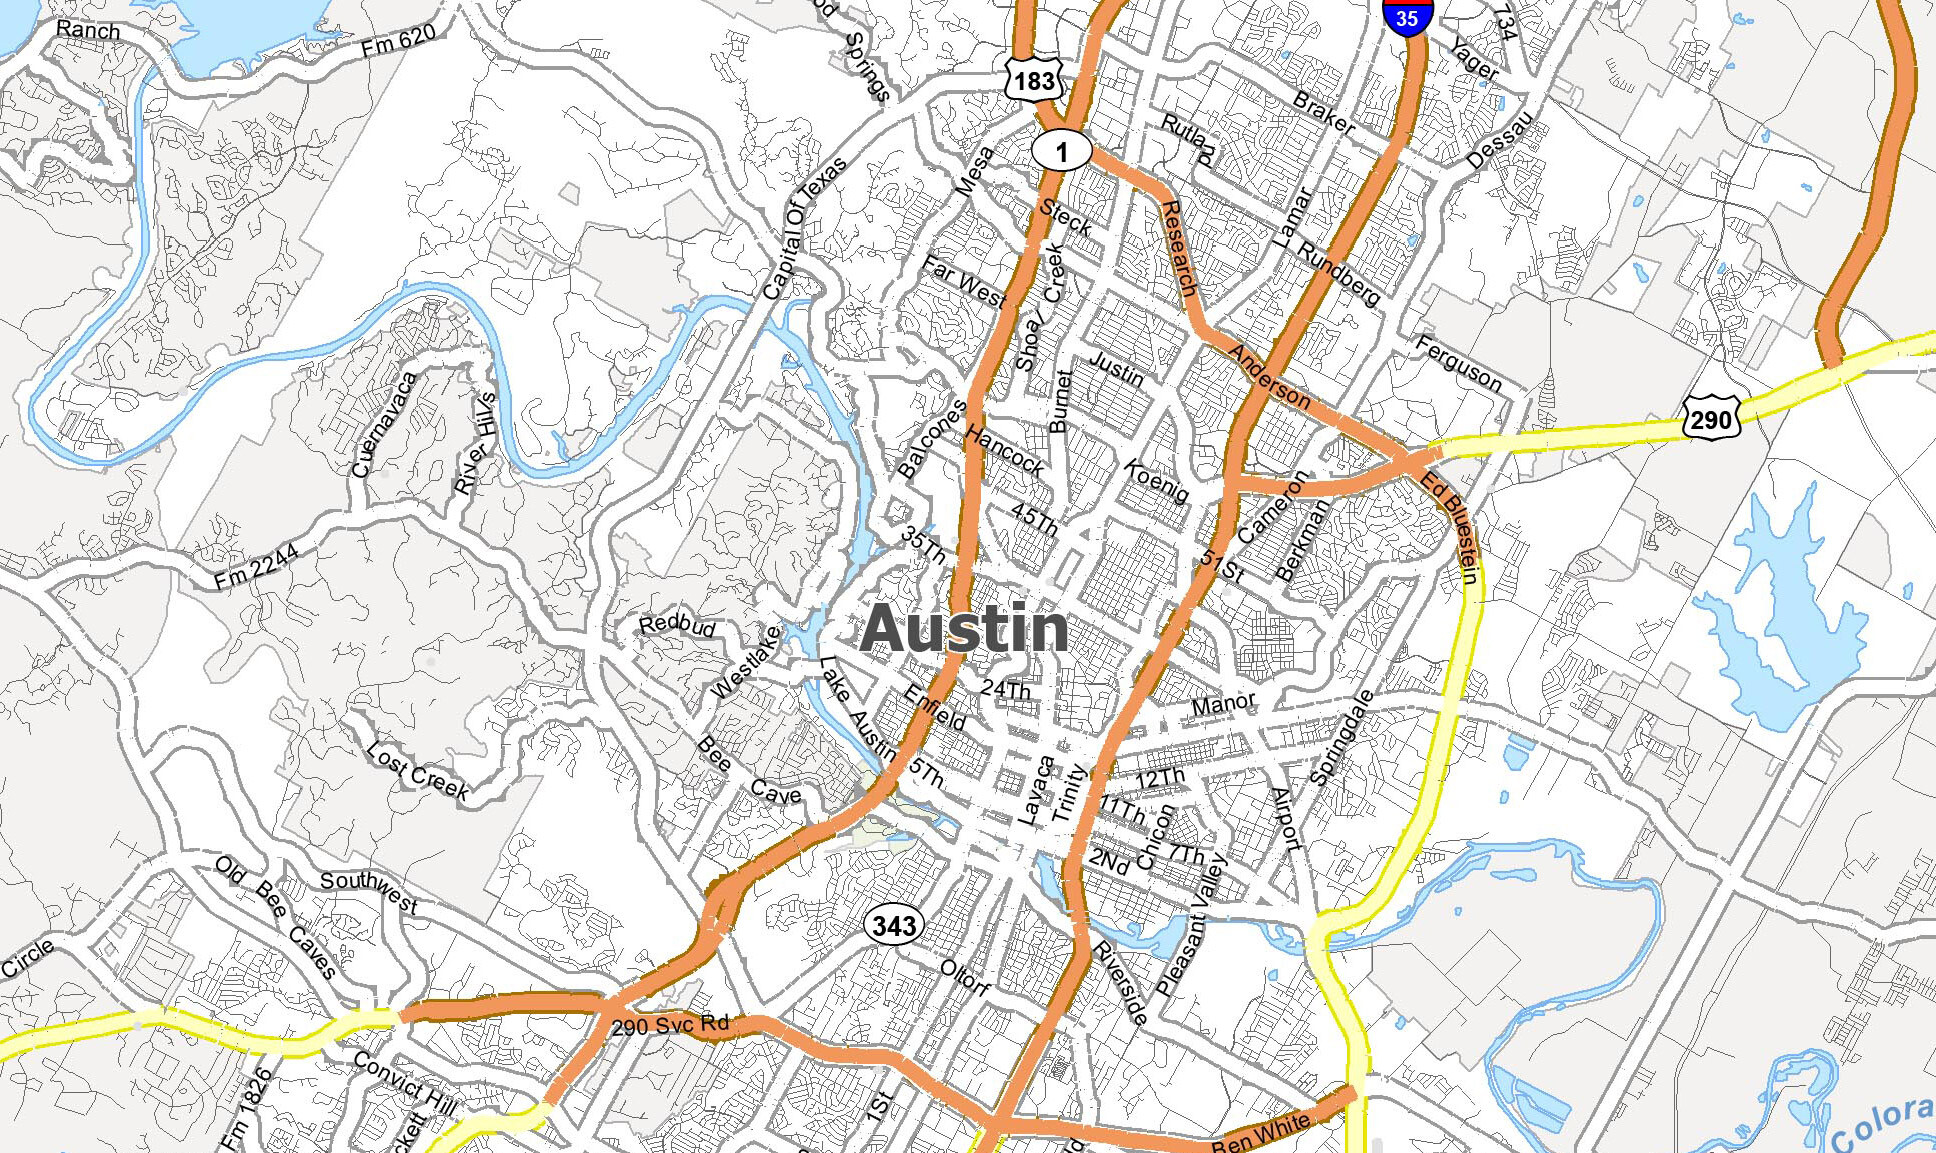 Map of Austin, Texas - GIS Geography